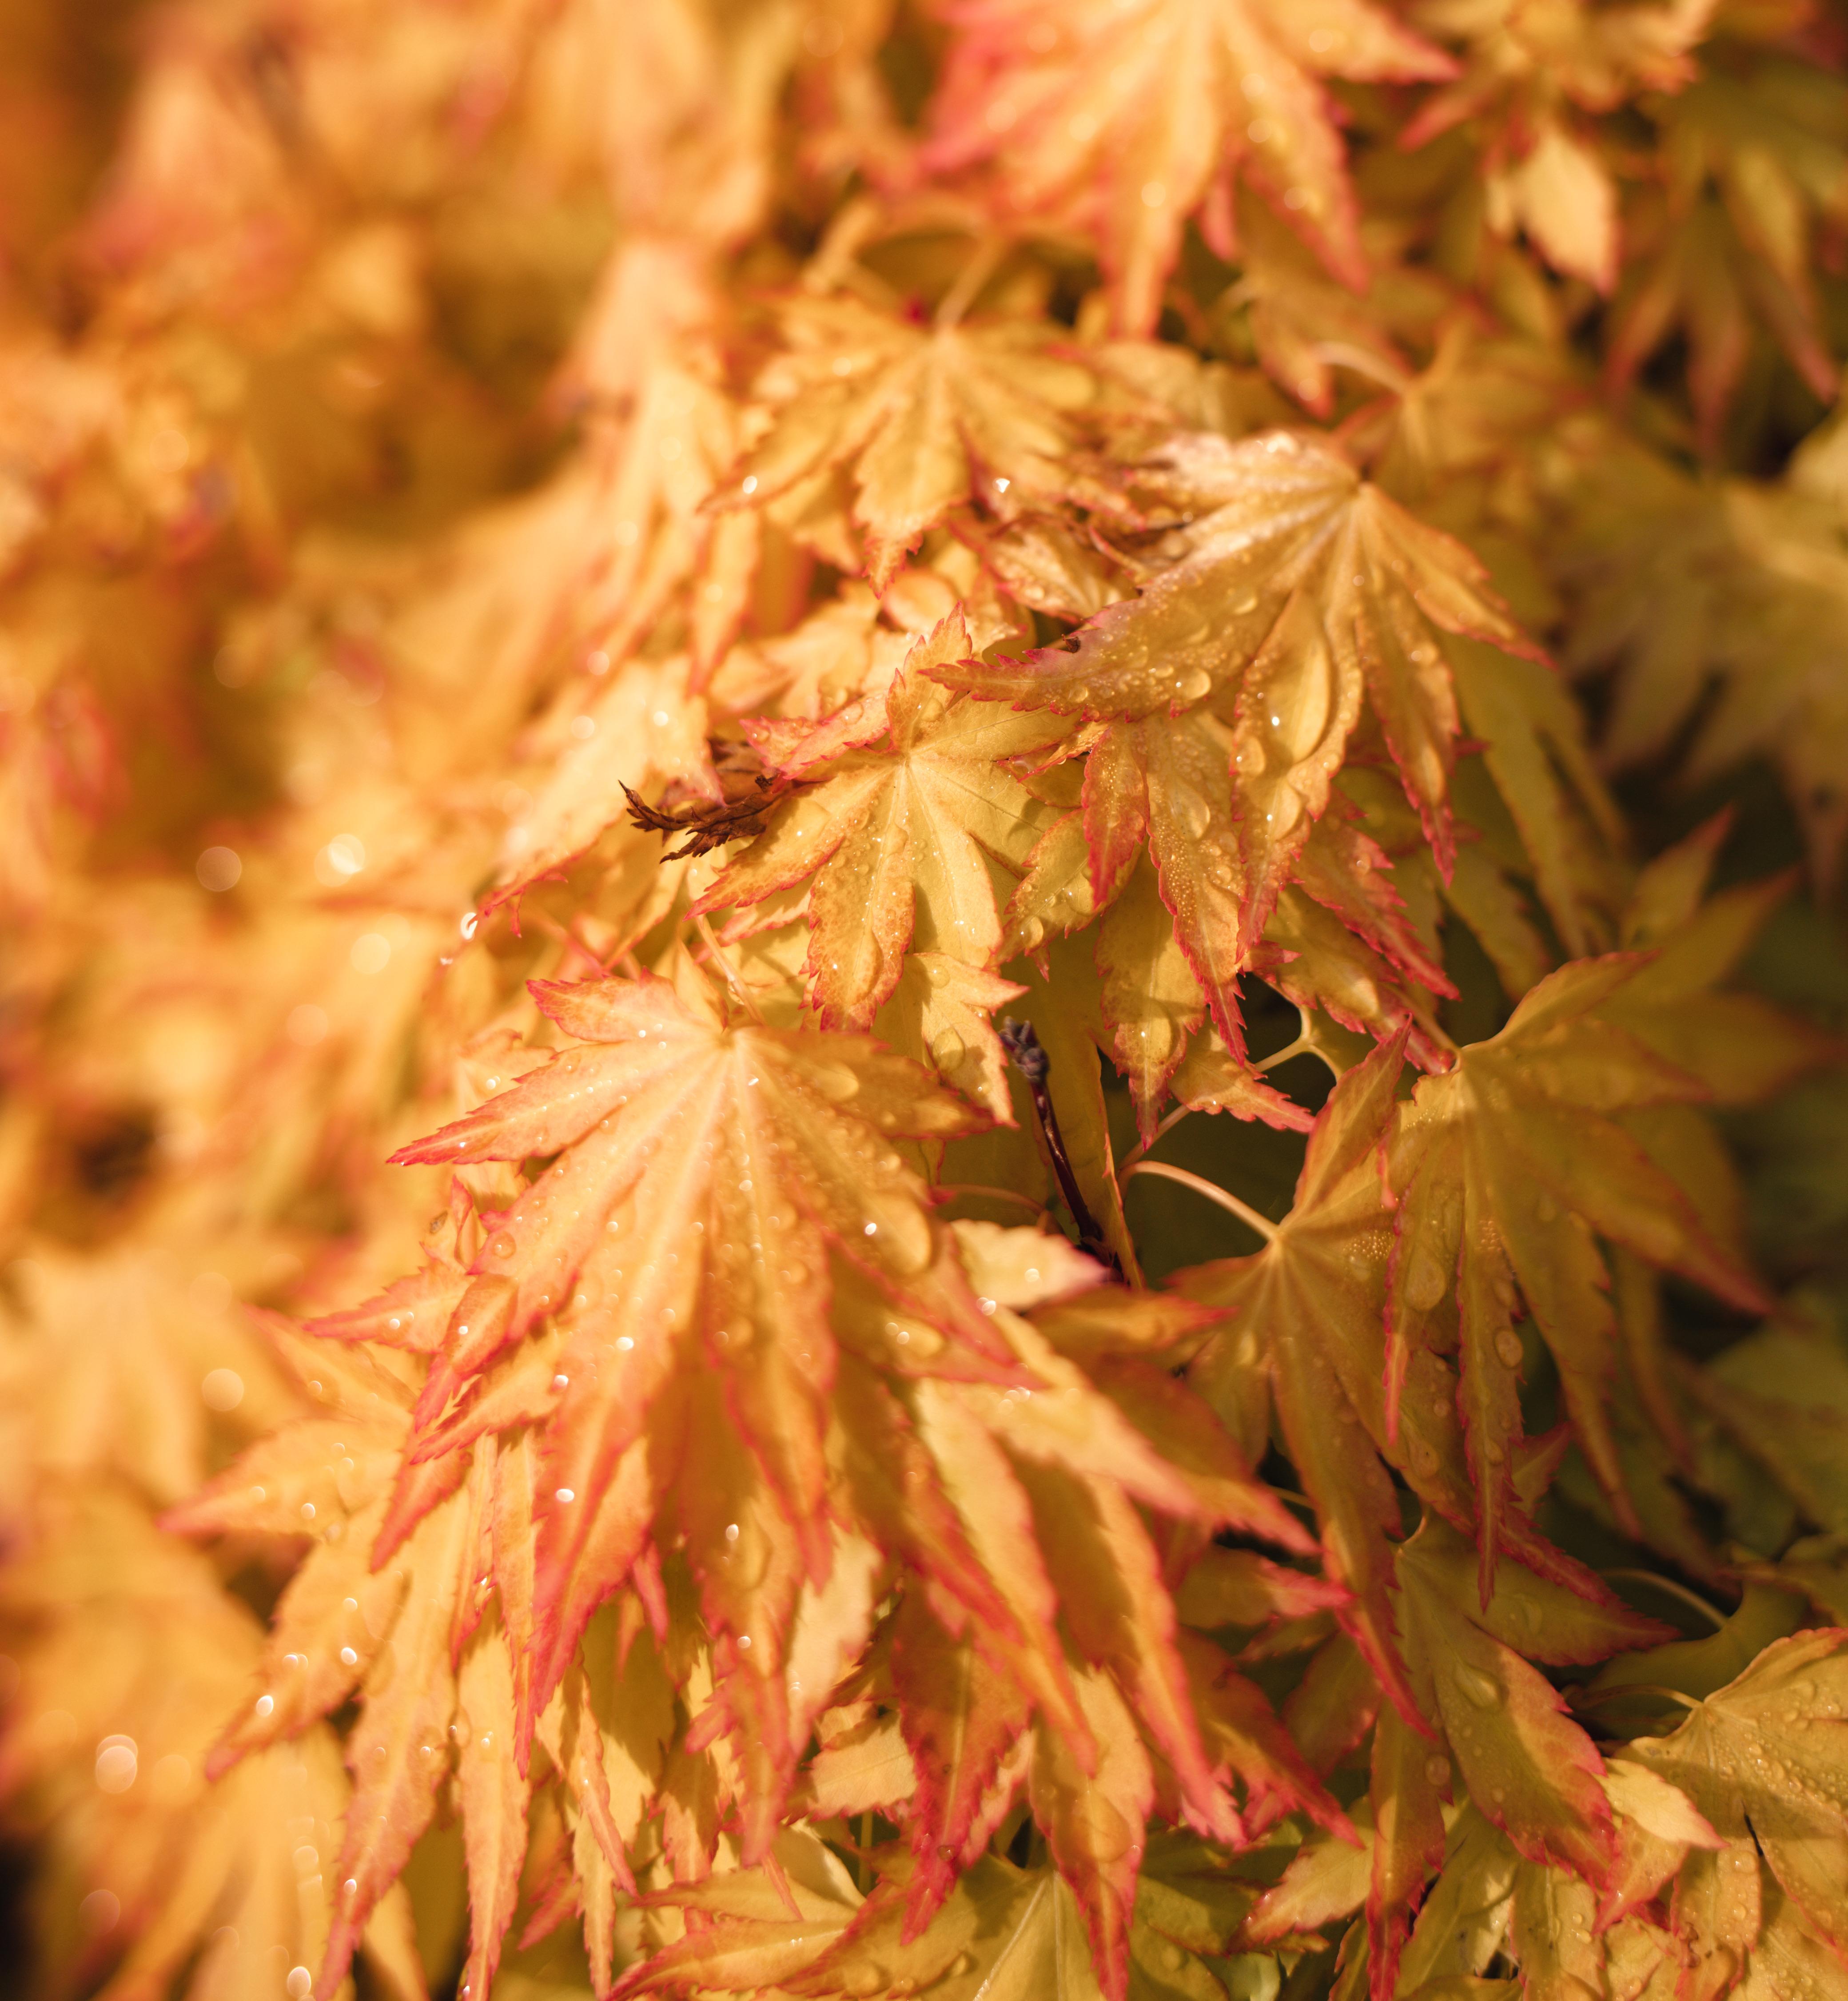 Light-Yellow-pink maple-shaped leaves, having light-yellow stems, showered by fresh morning dew.  